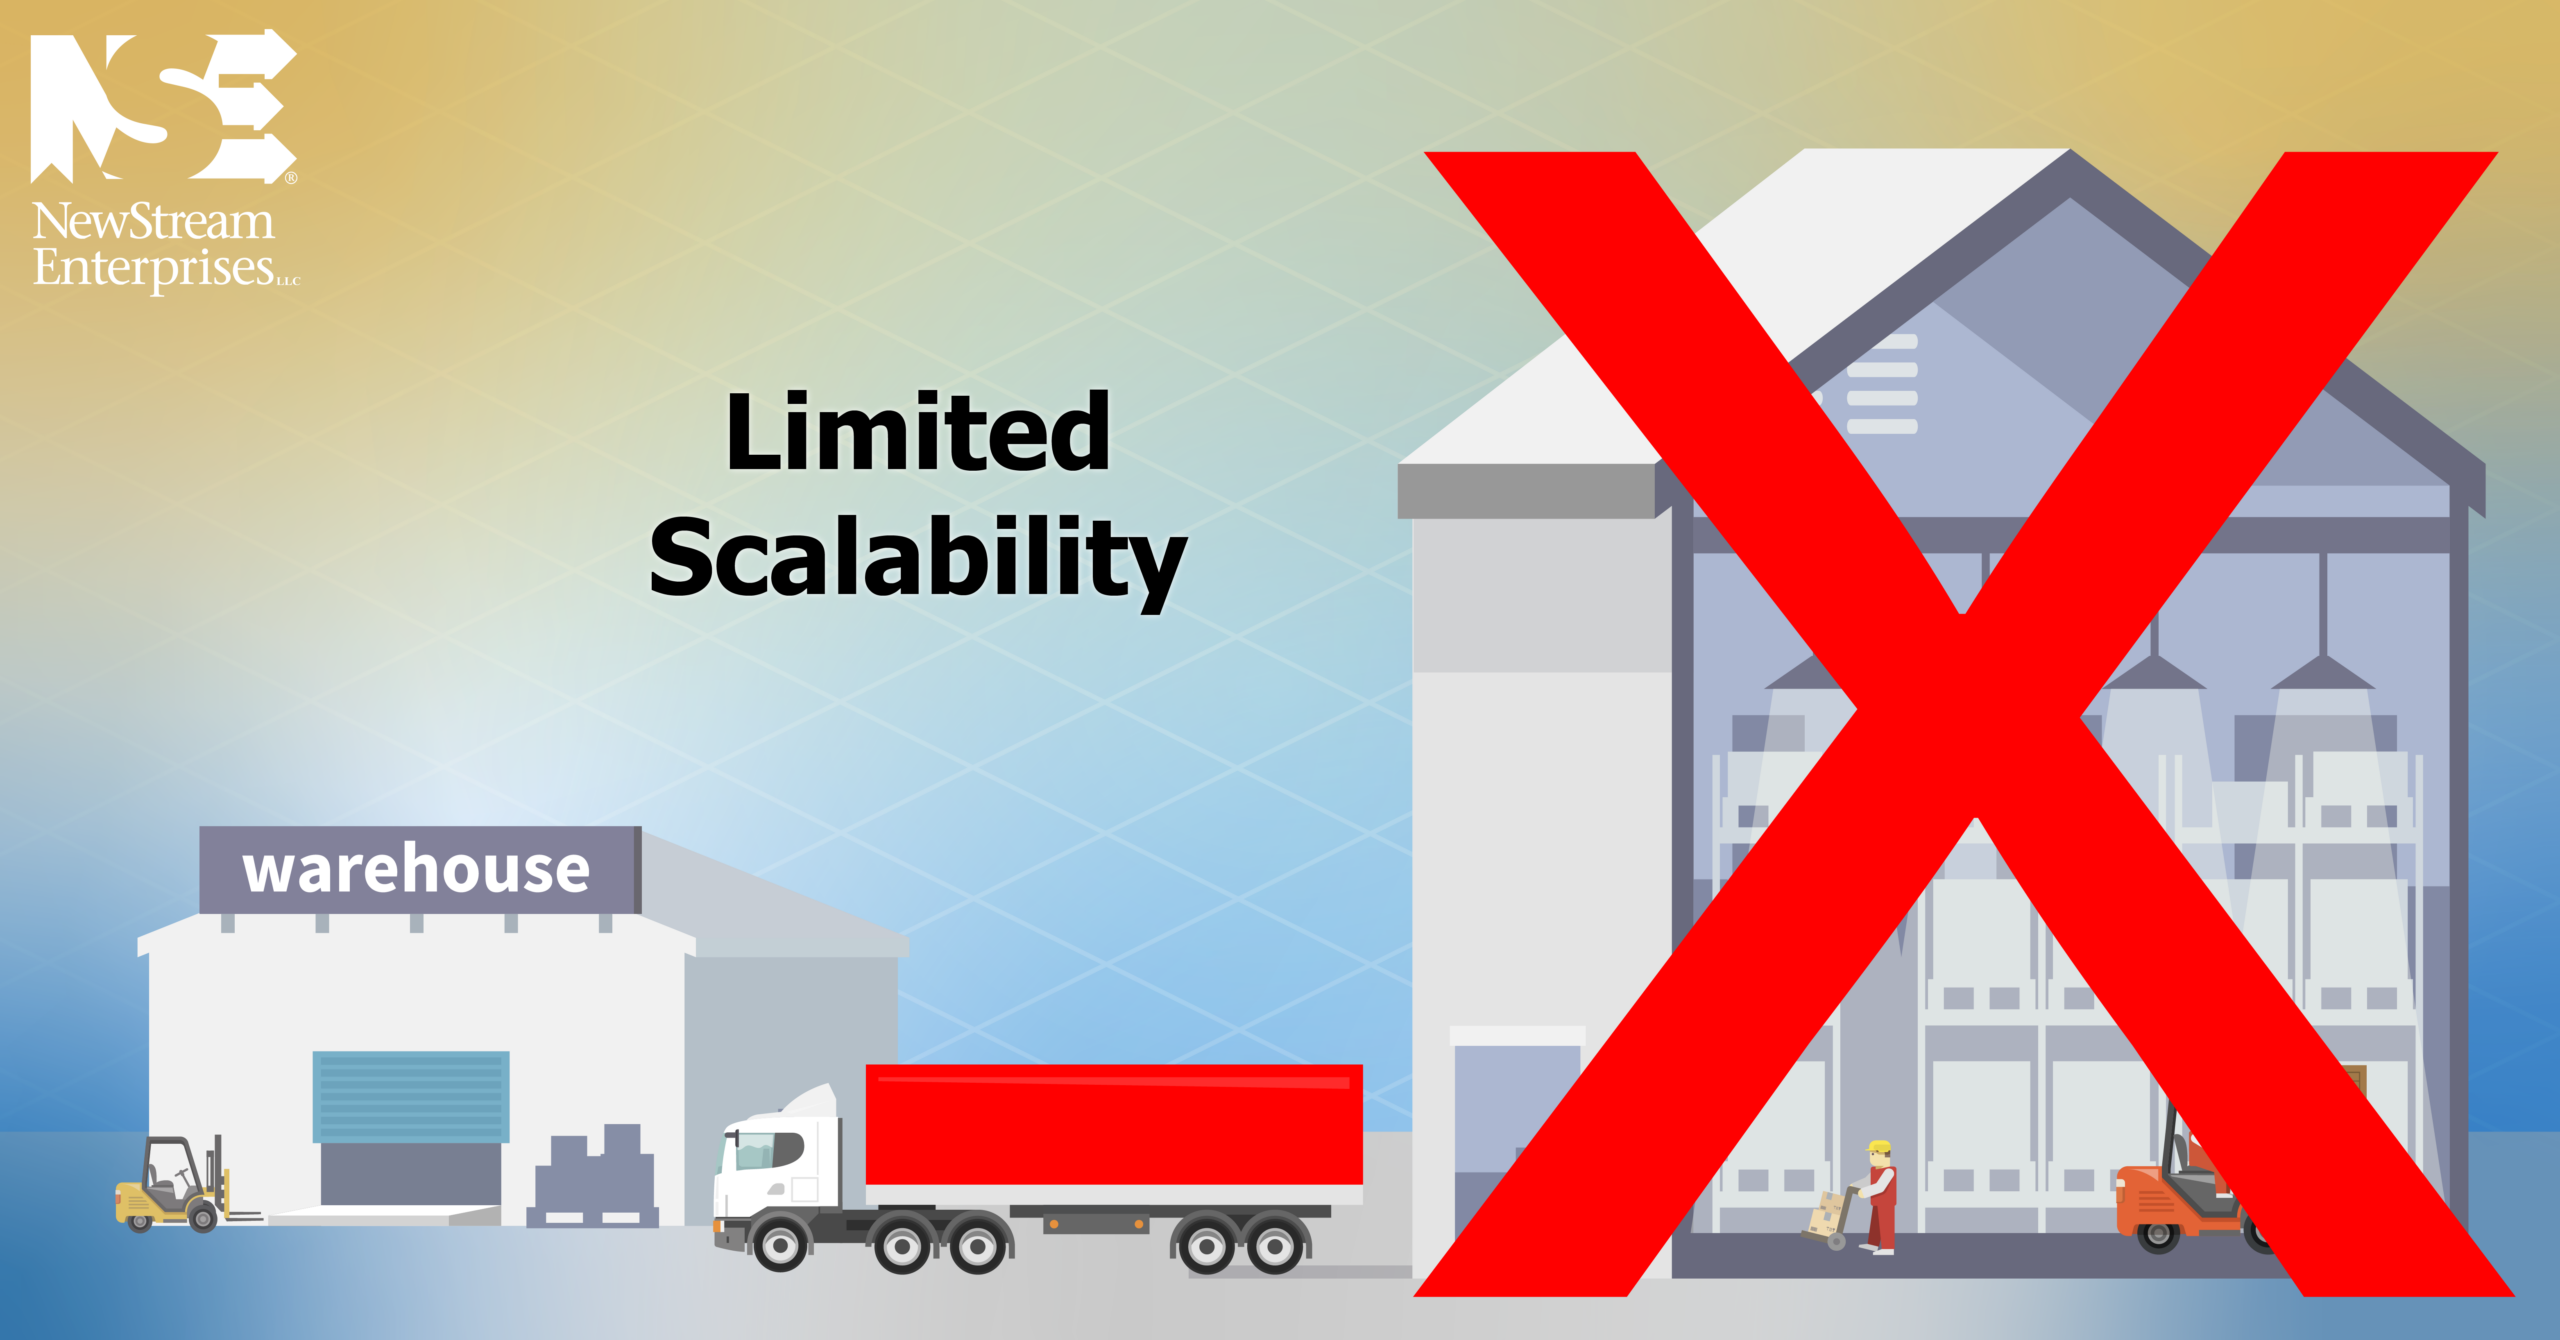 Limited scalability